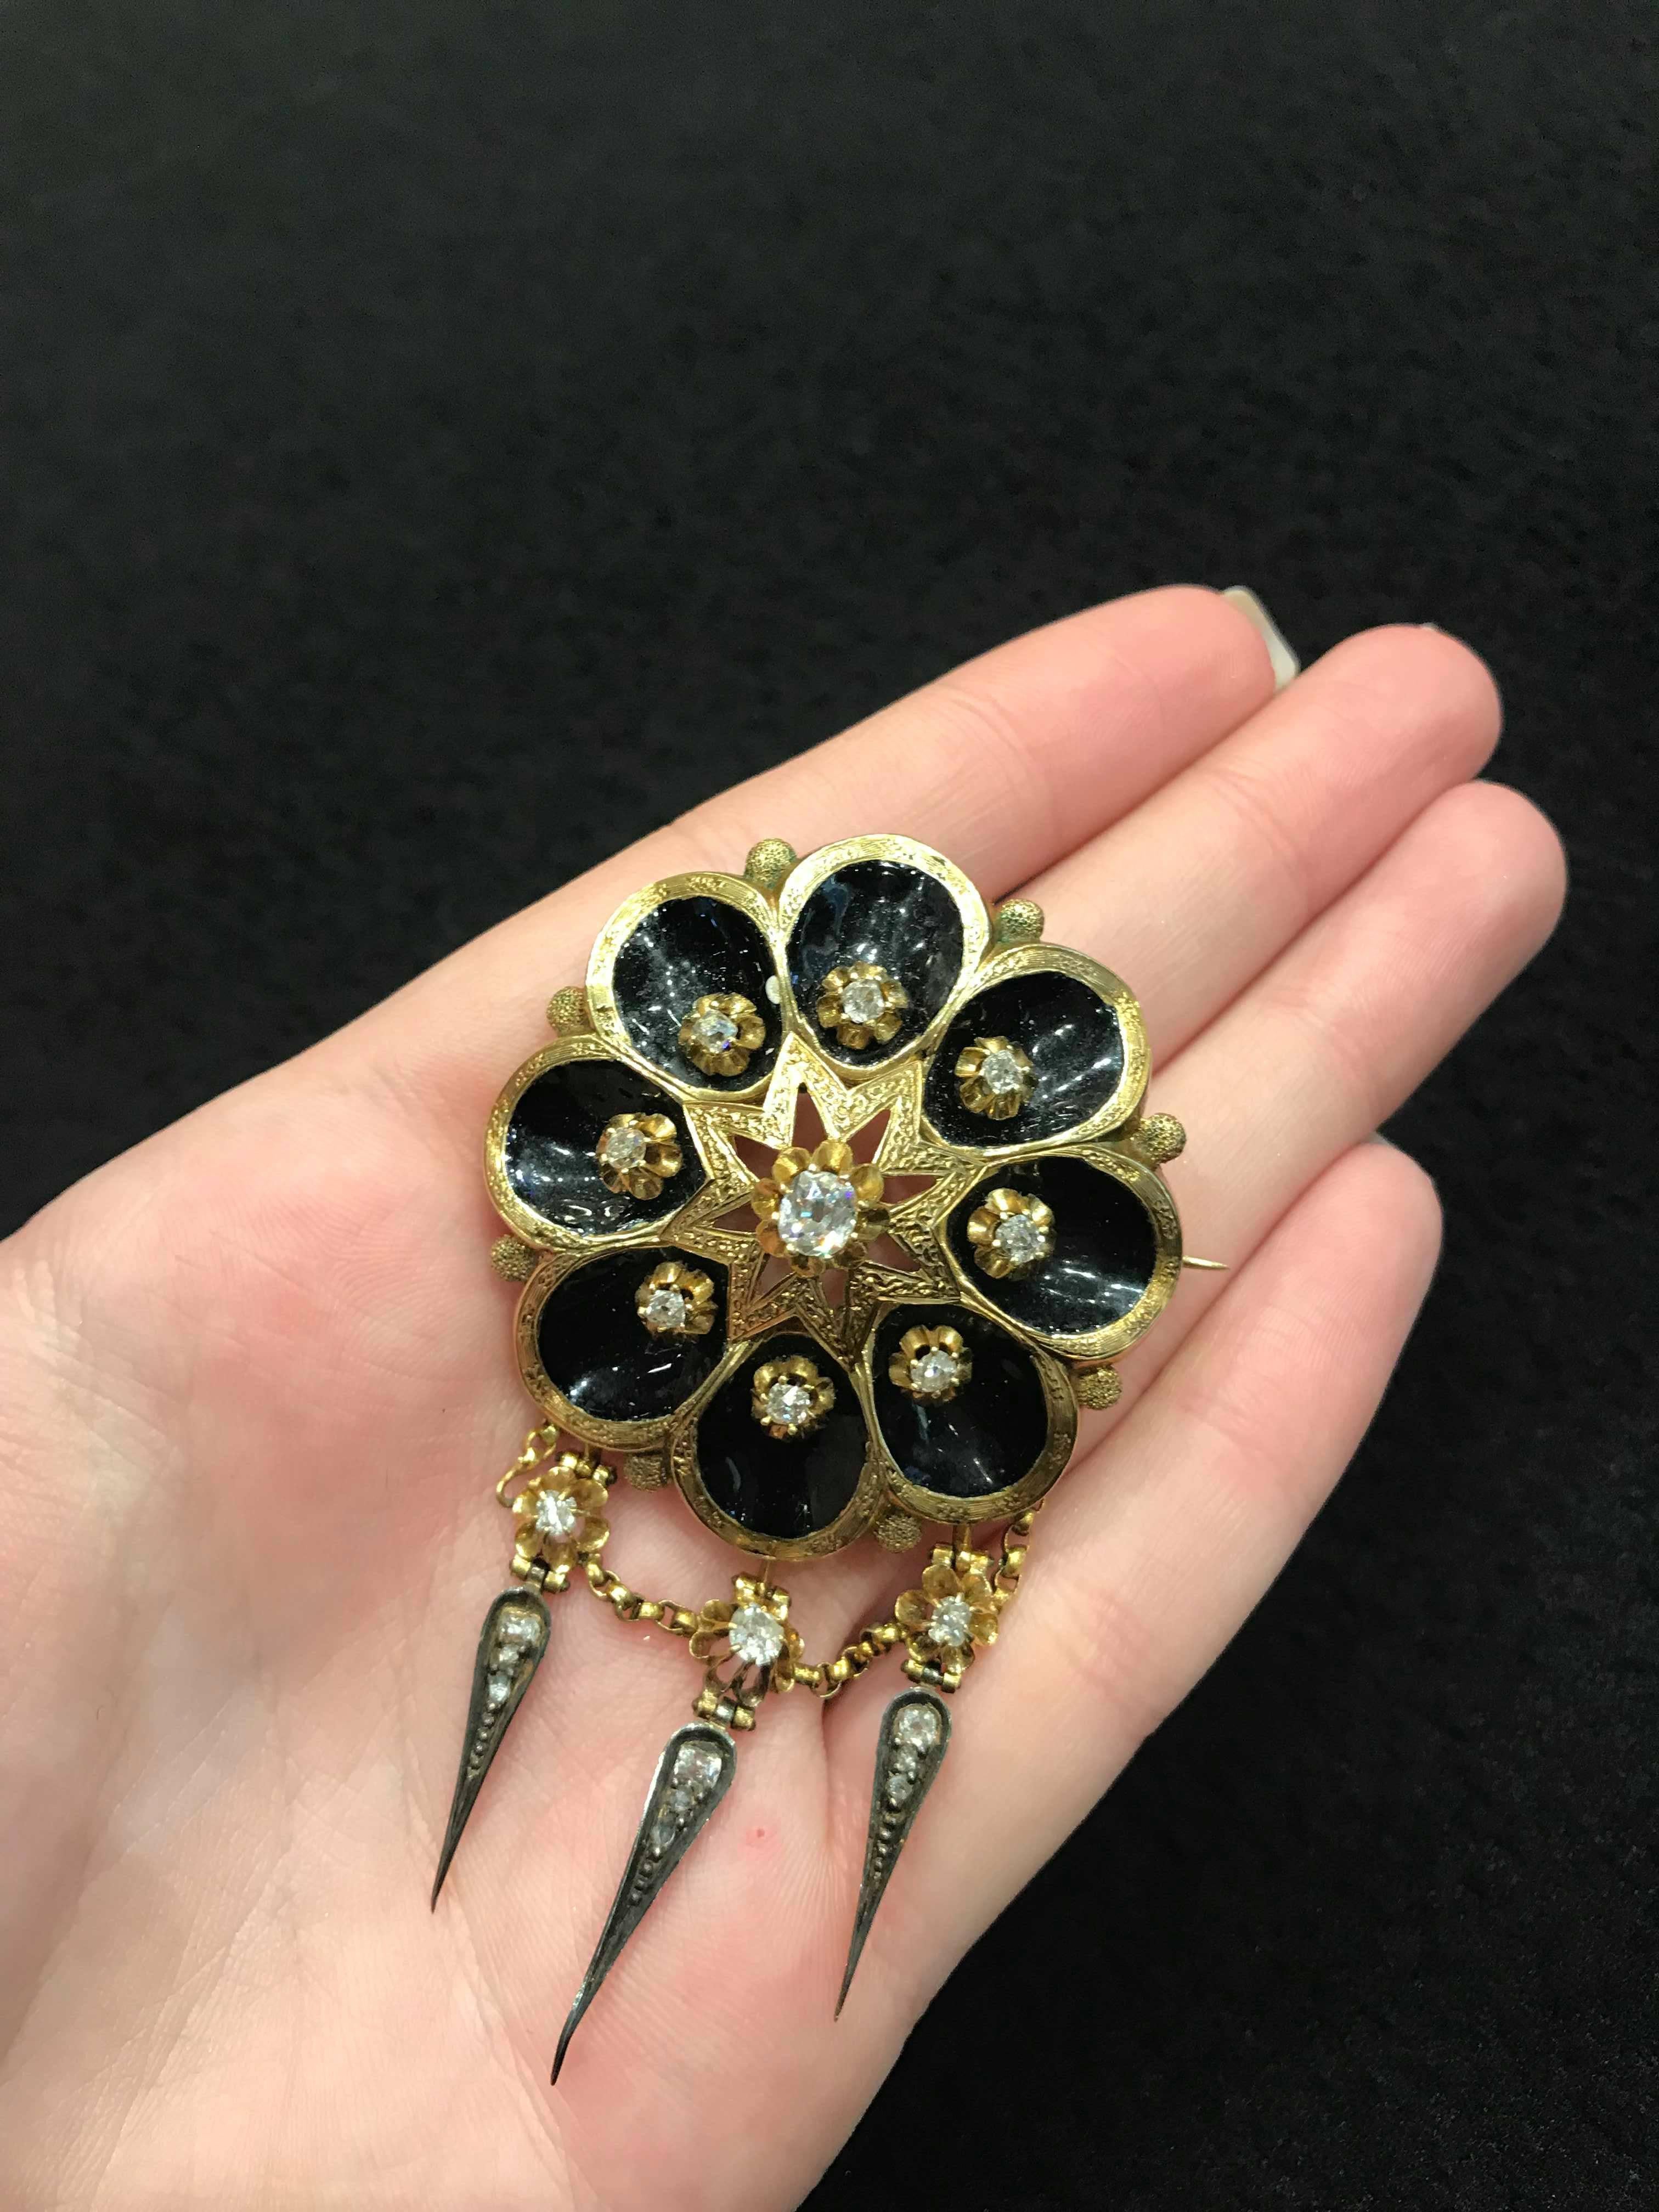 14 Carat Gold 1870s Victorian Mourning Brooch 1.44 Carat Diamond and Enamel In Excellent Condition For Sale In Melbourne, AU